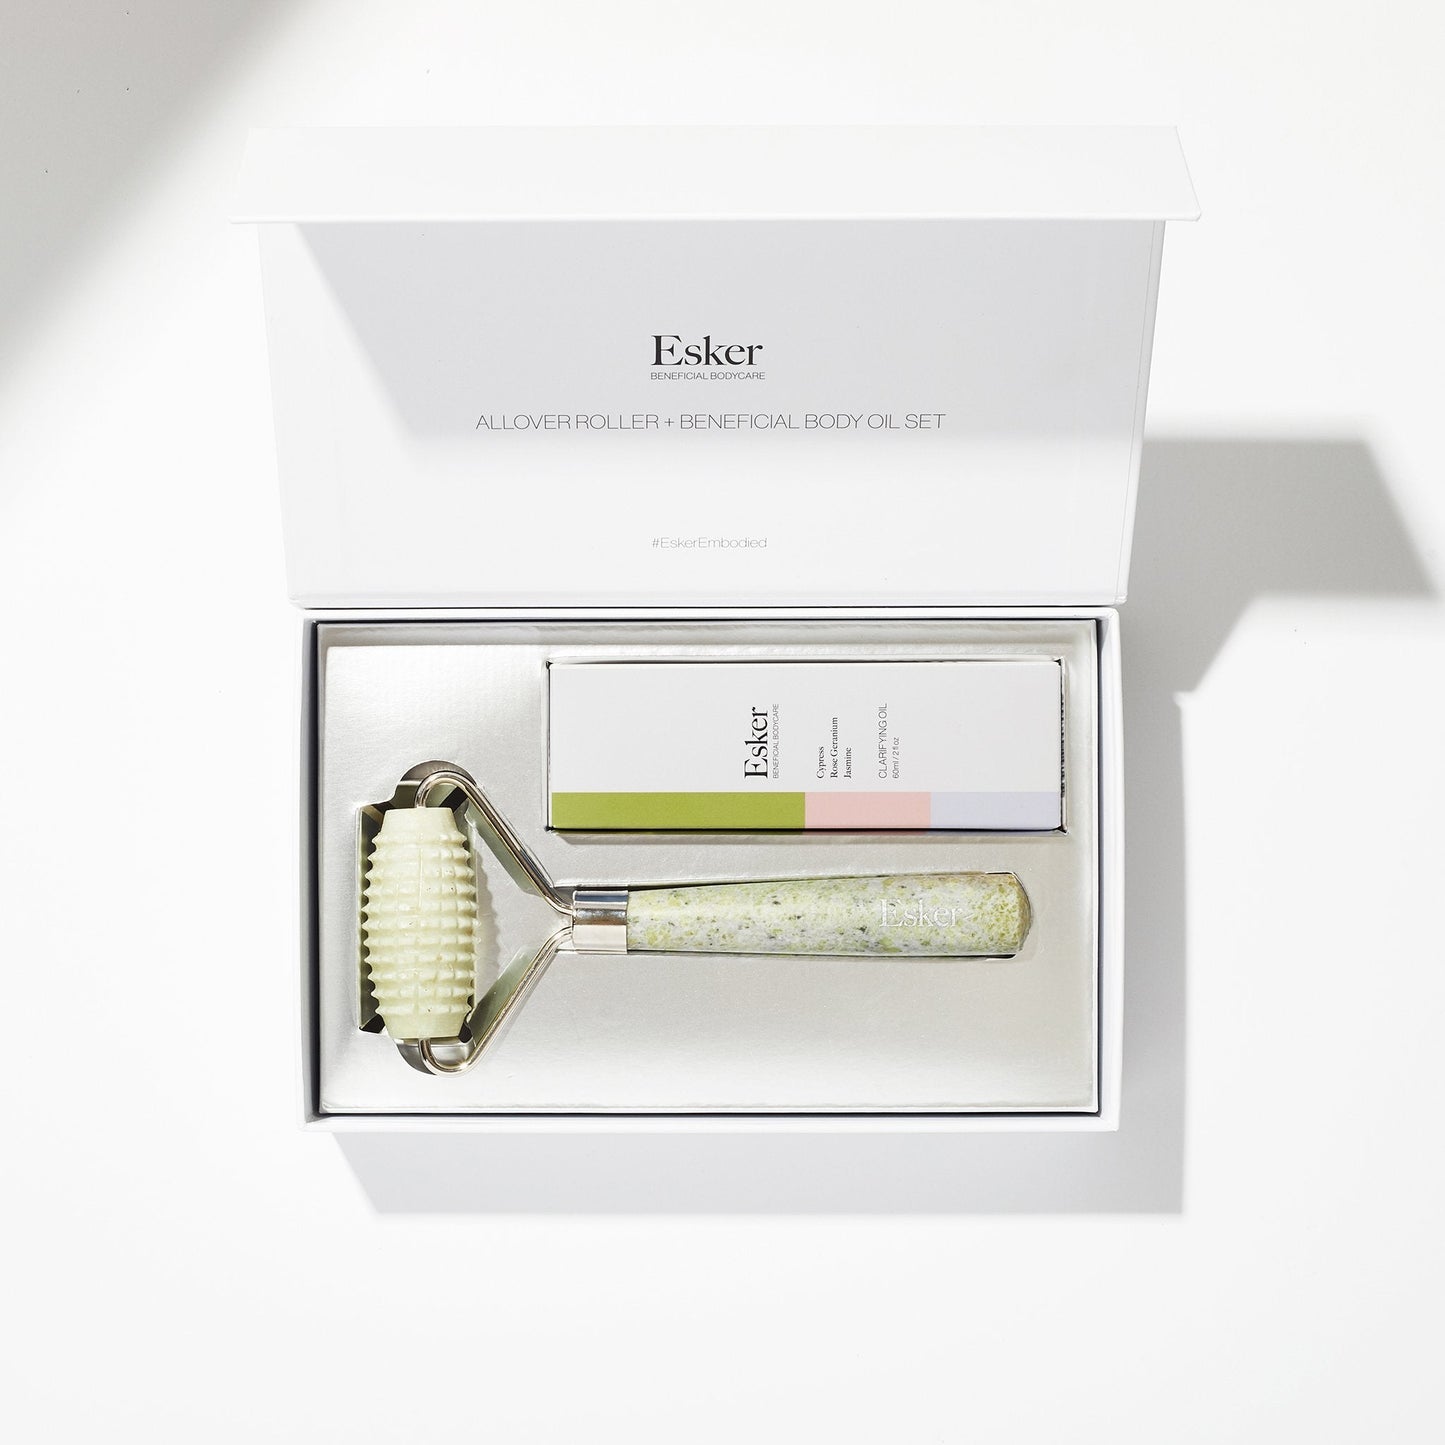 Esker’s Allover Roller and Clarifying Oil Duo in the box